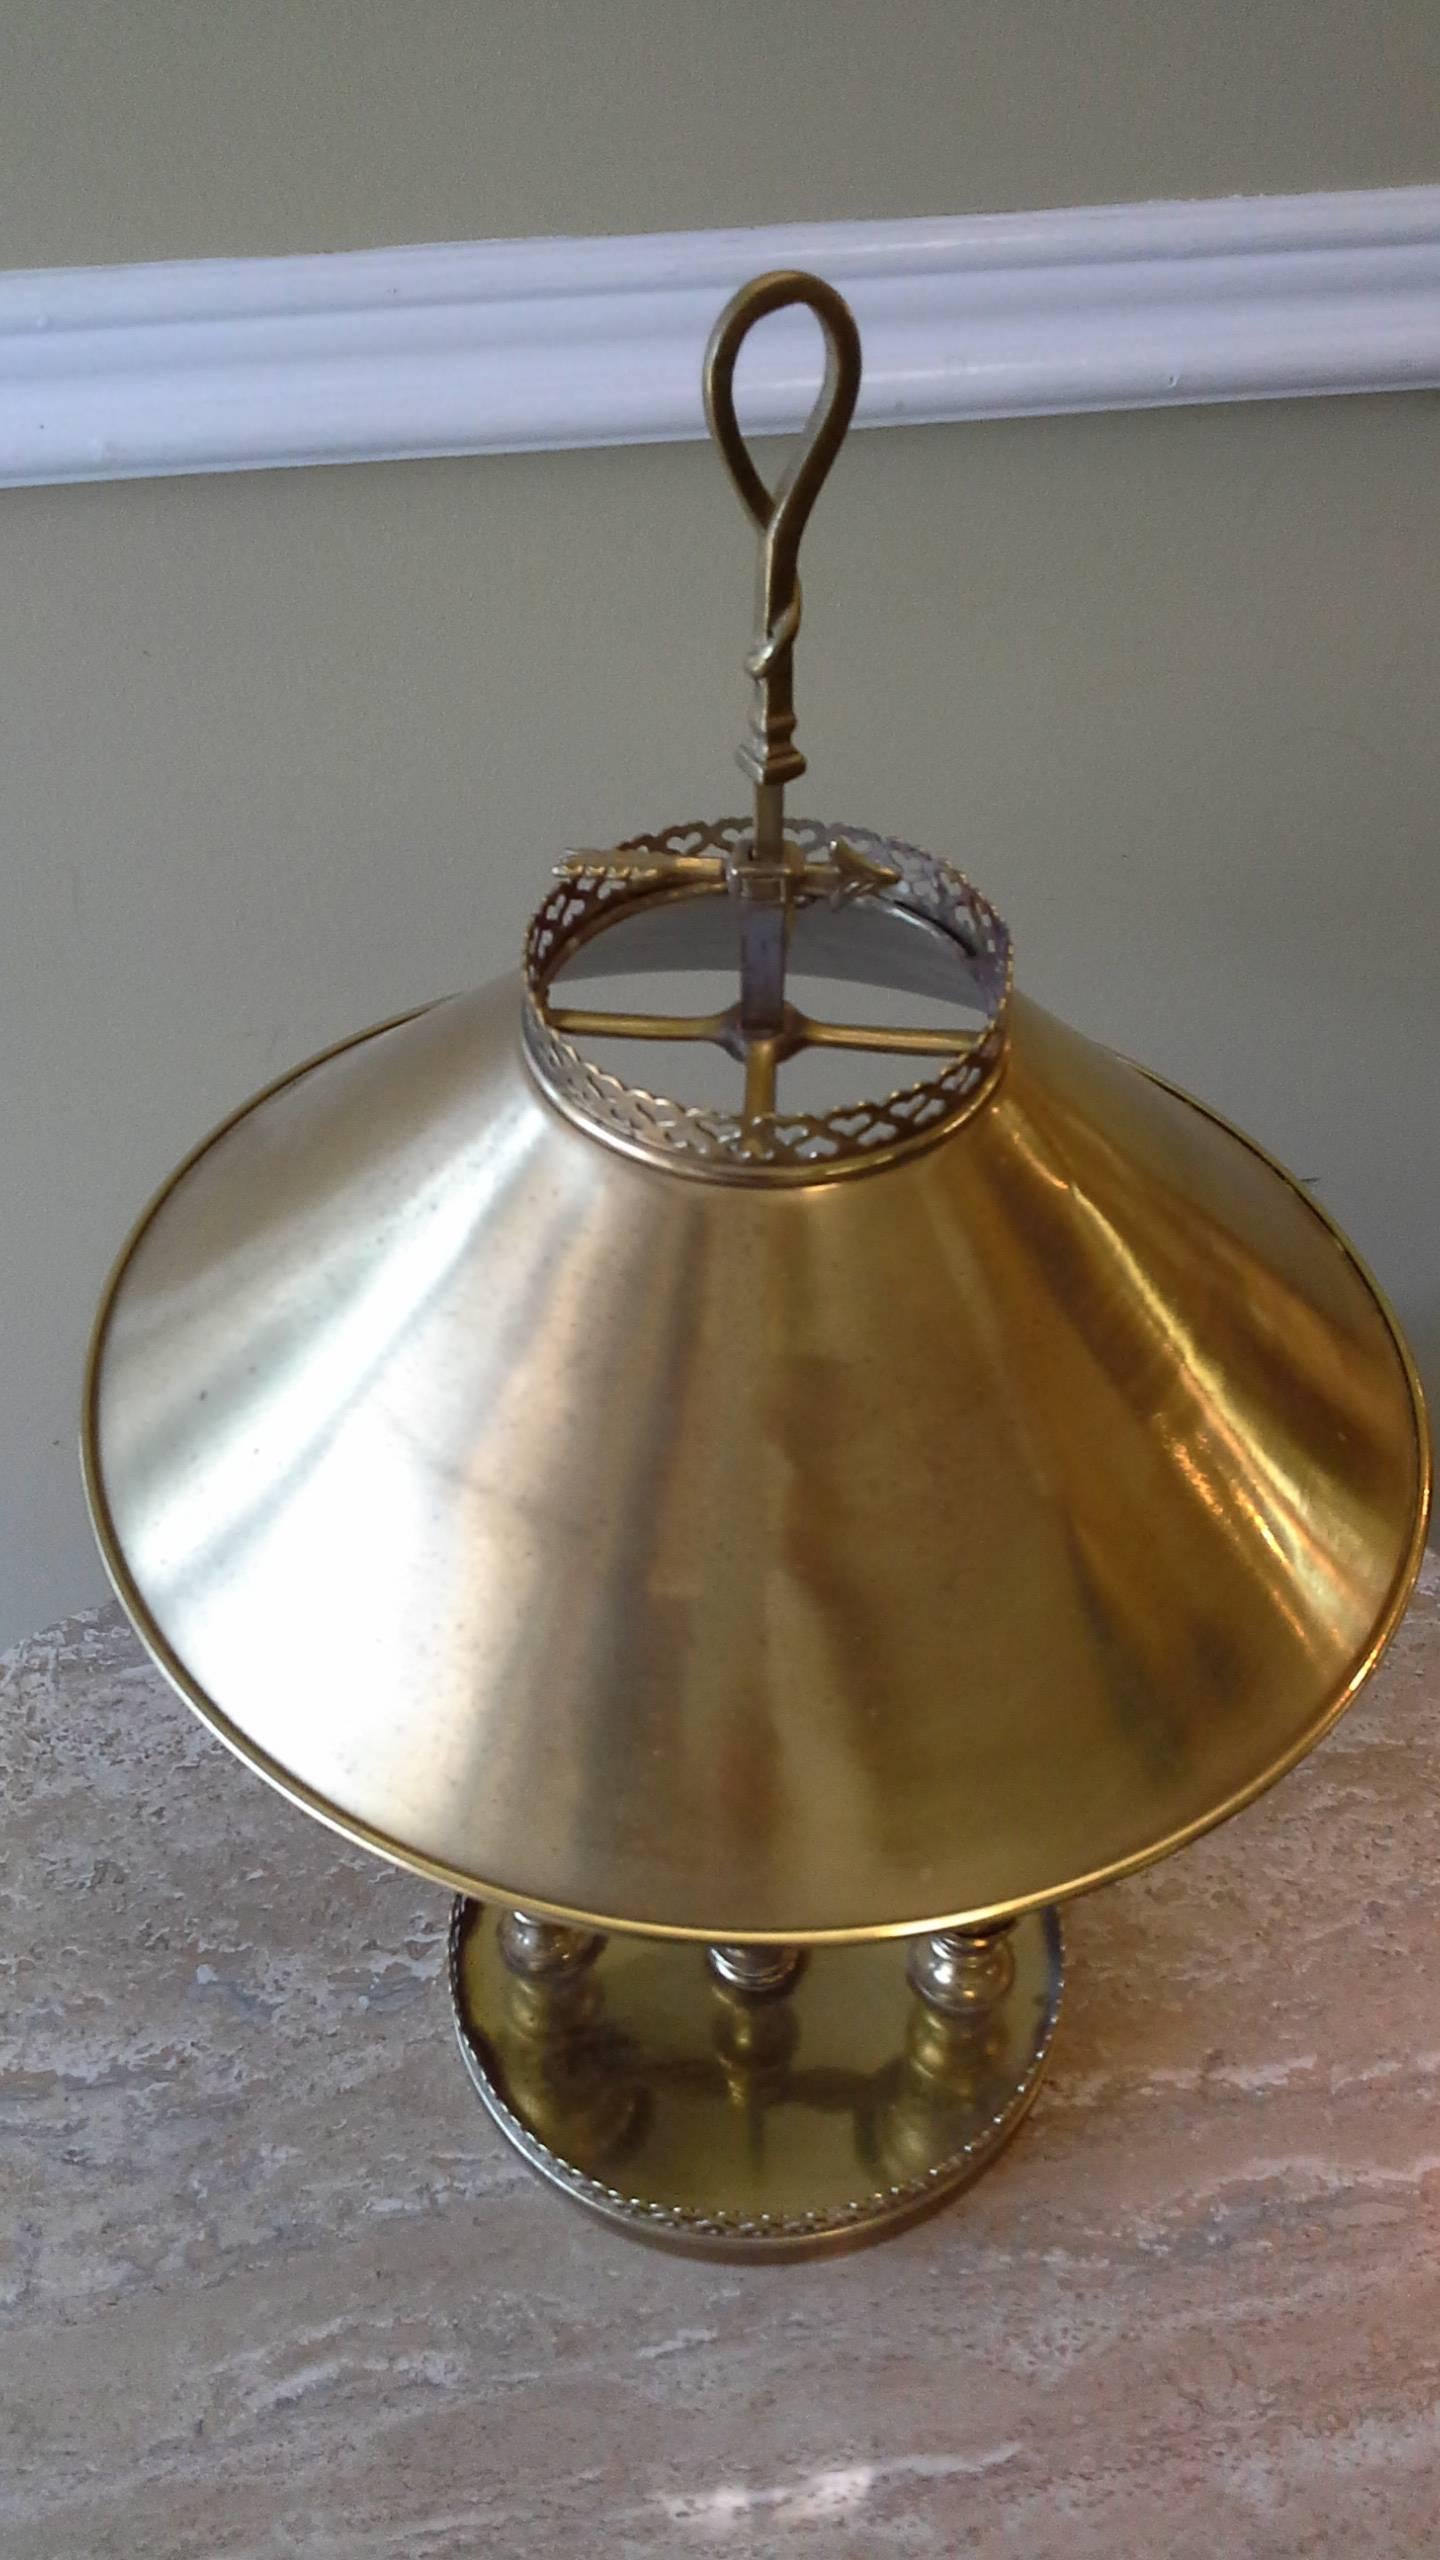 Brass double light desk/banquet lamp metal shade heart pierced round gallery base, the desk lamp has two lights for ample lighting, tray top switch with an adjustable height shade with a arrow set screw. The lamp measures 22"-inches high x